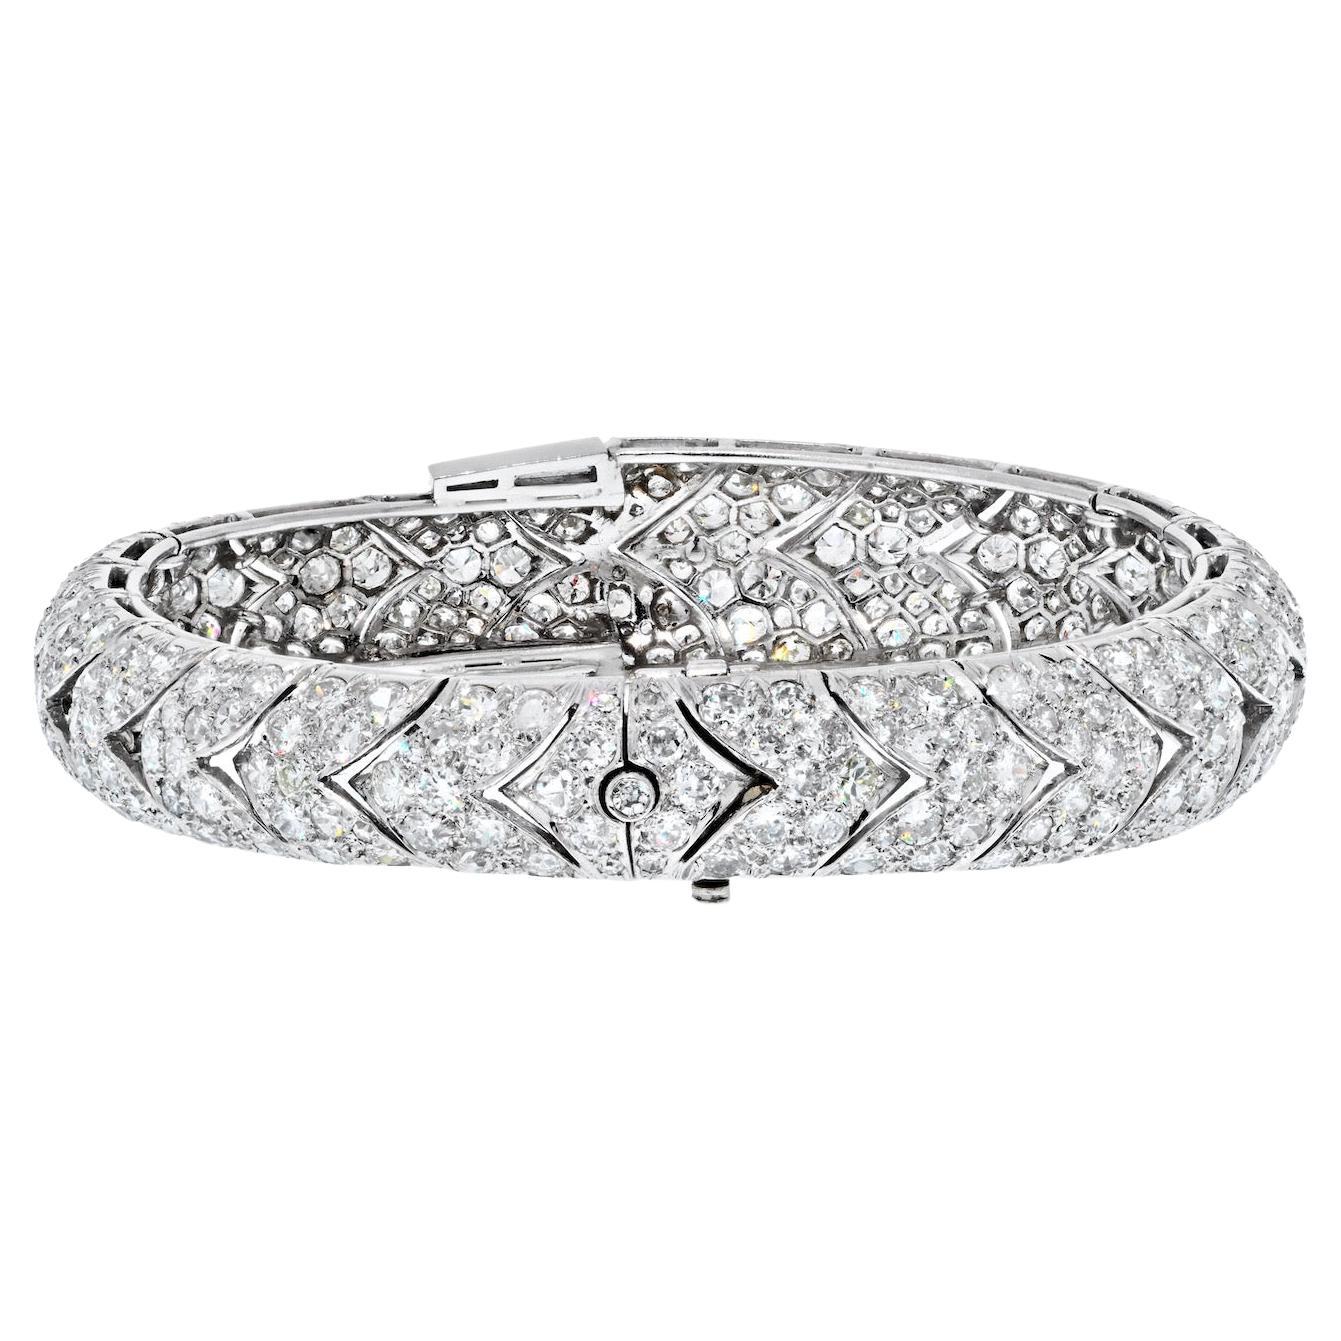 This is a very special bracelet from the Art Deco era, crafted circa 1930's in platinum with diamonds. 
Mounted with over 400 diamonds of old cut round shapes and a few baguettes. Lovely sparkle, clean overall. 
Perfect for a wrist size 6.25in to